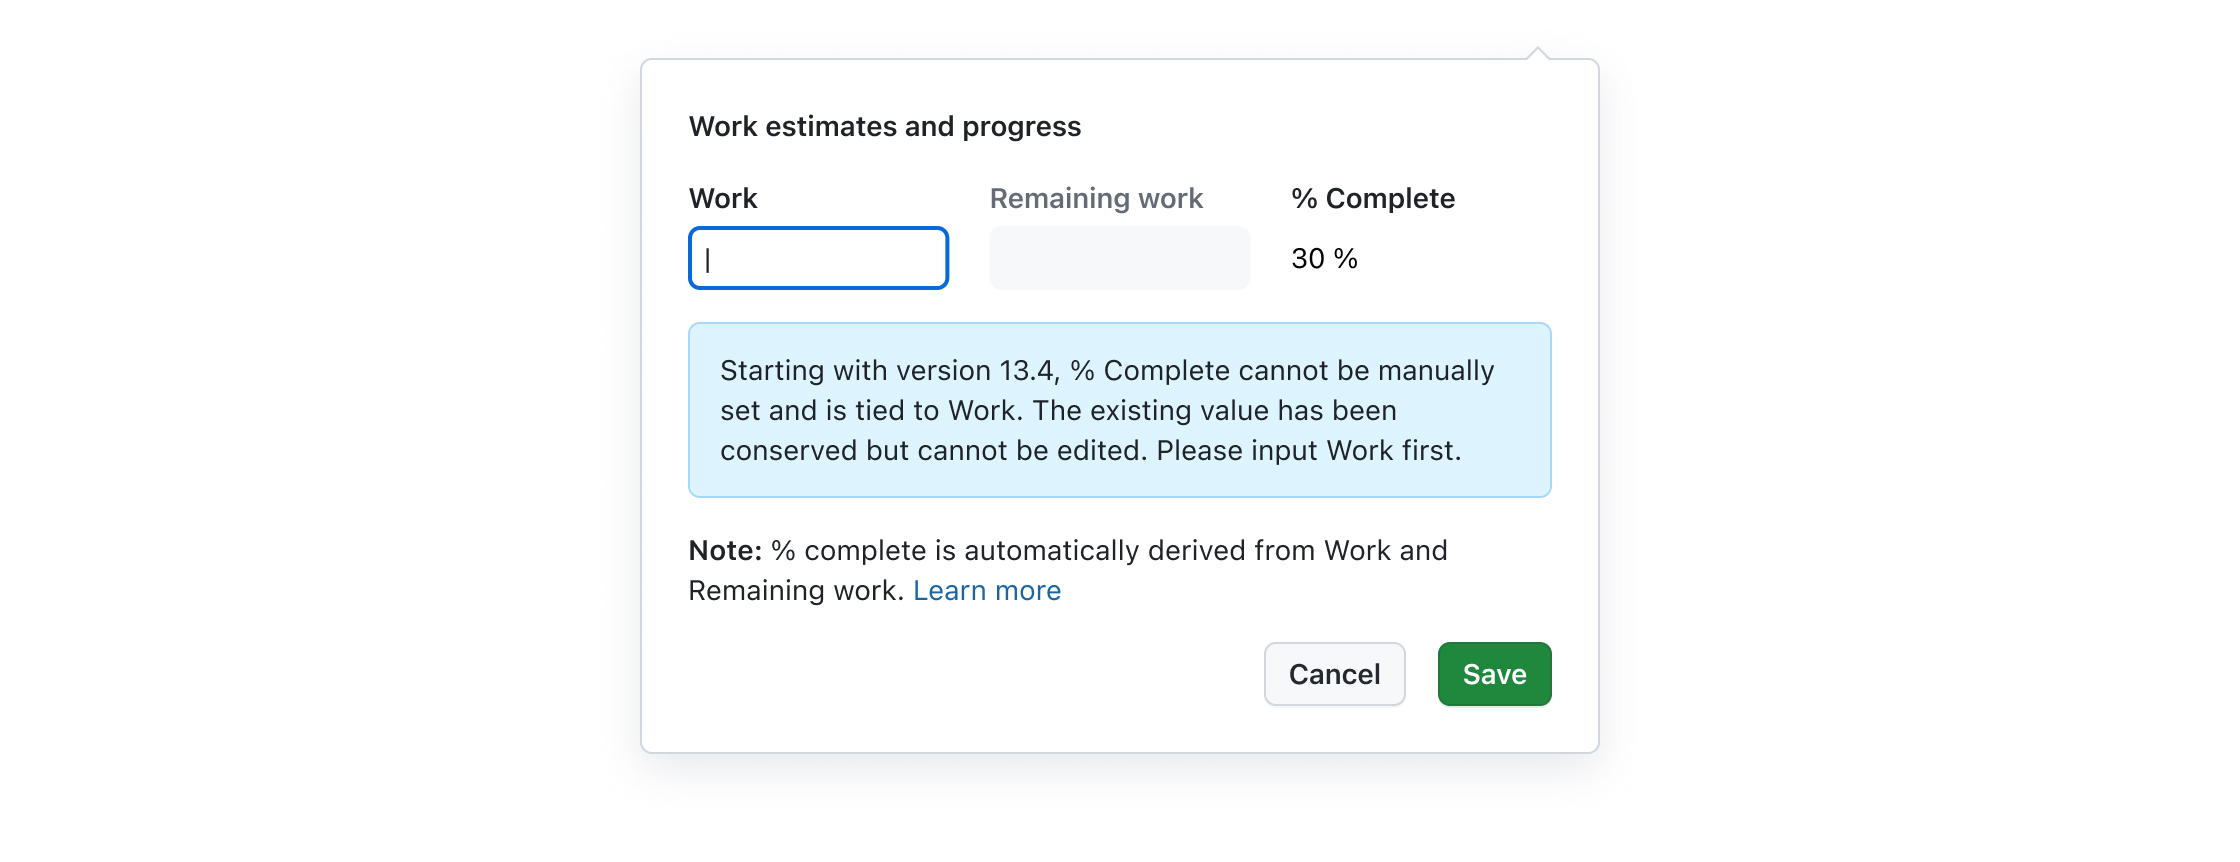 Entering Work will automatically derive Remaining work using the value for % Complete